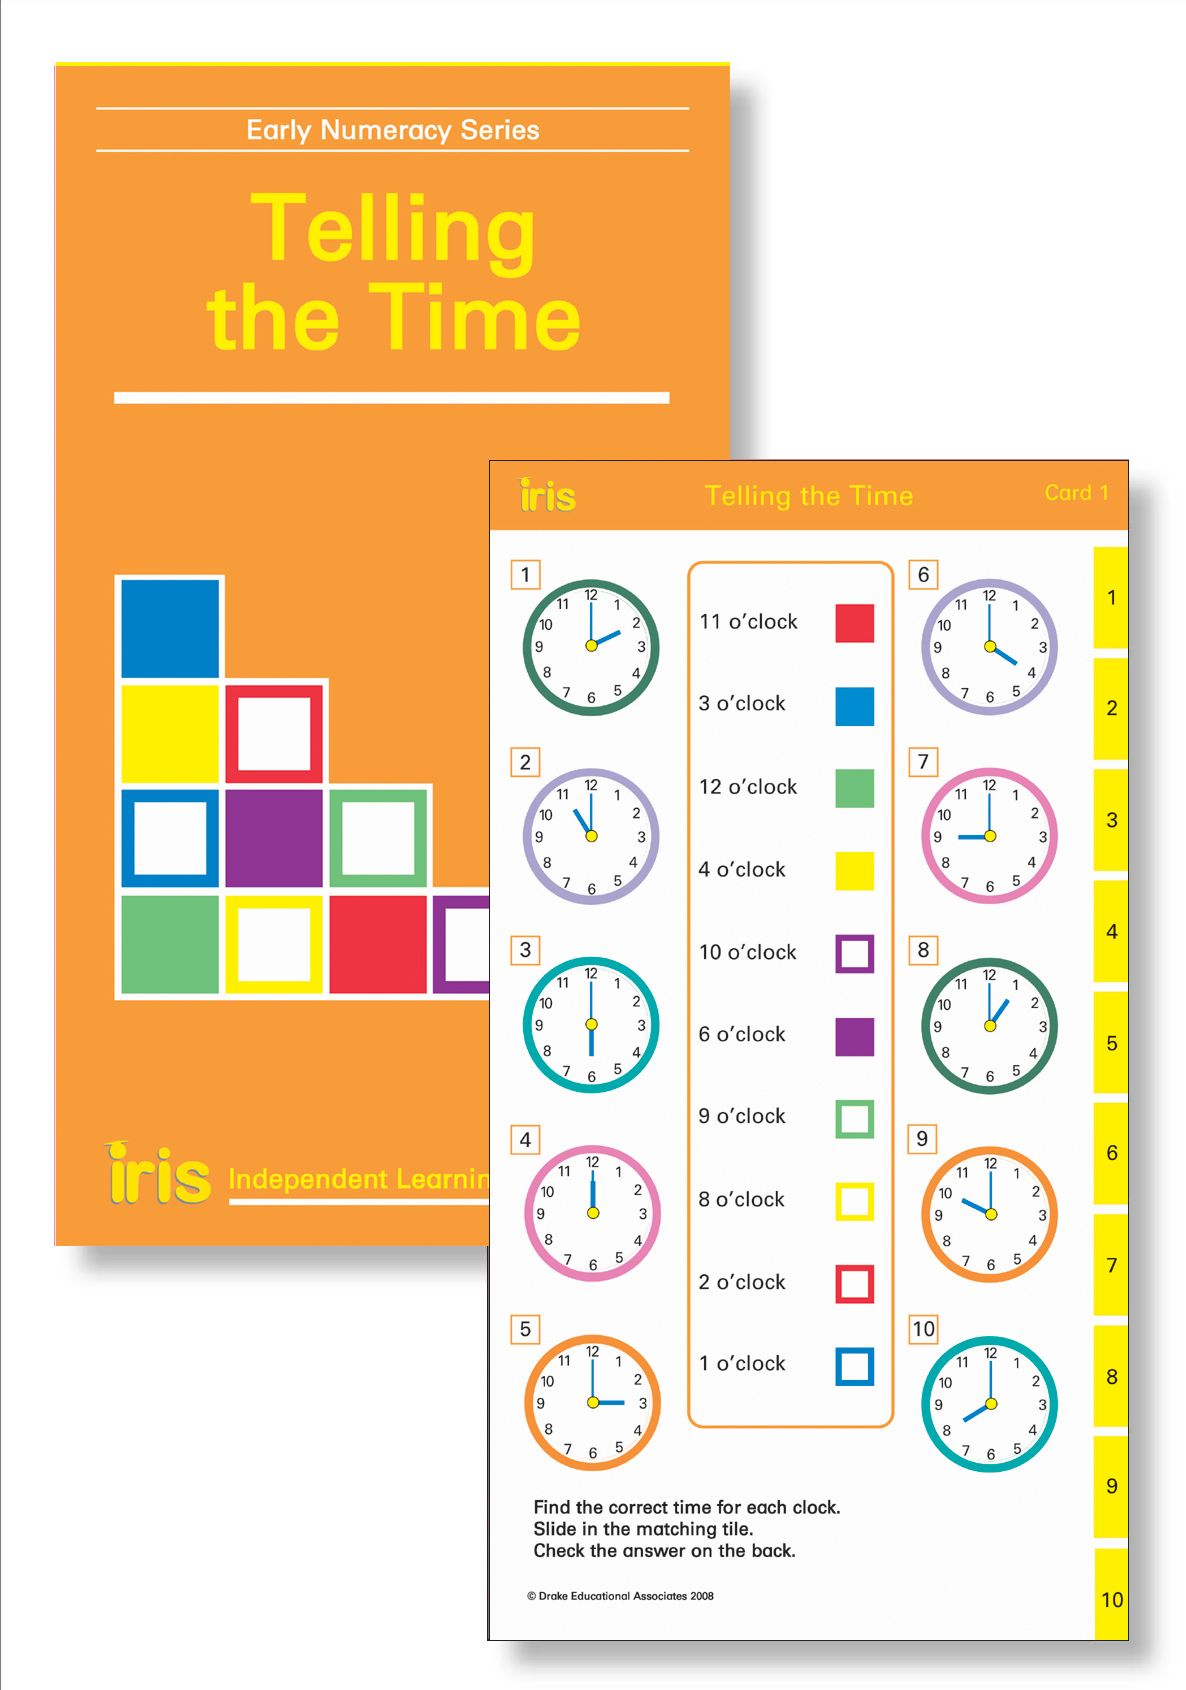 Iris Study Cards: Early Numeracy Year 2 - Telling the Time